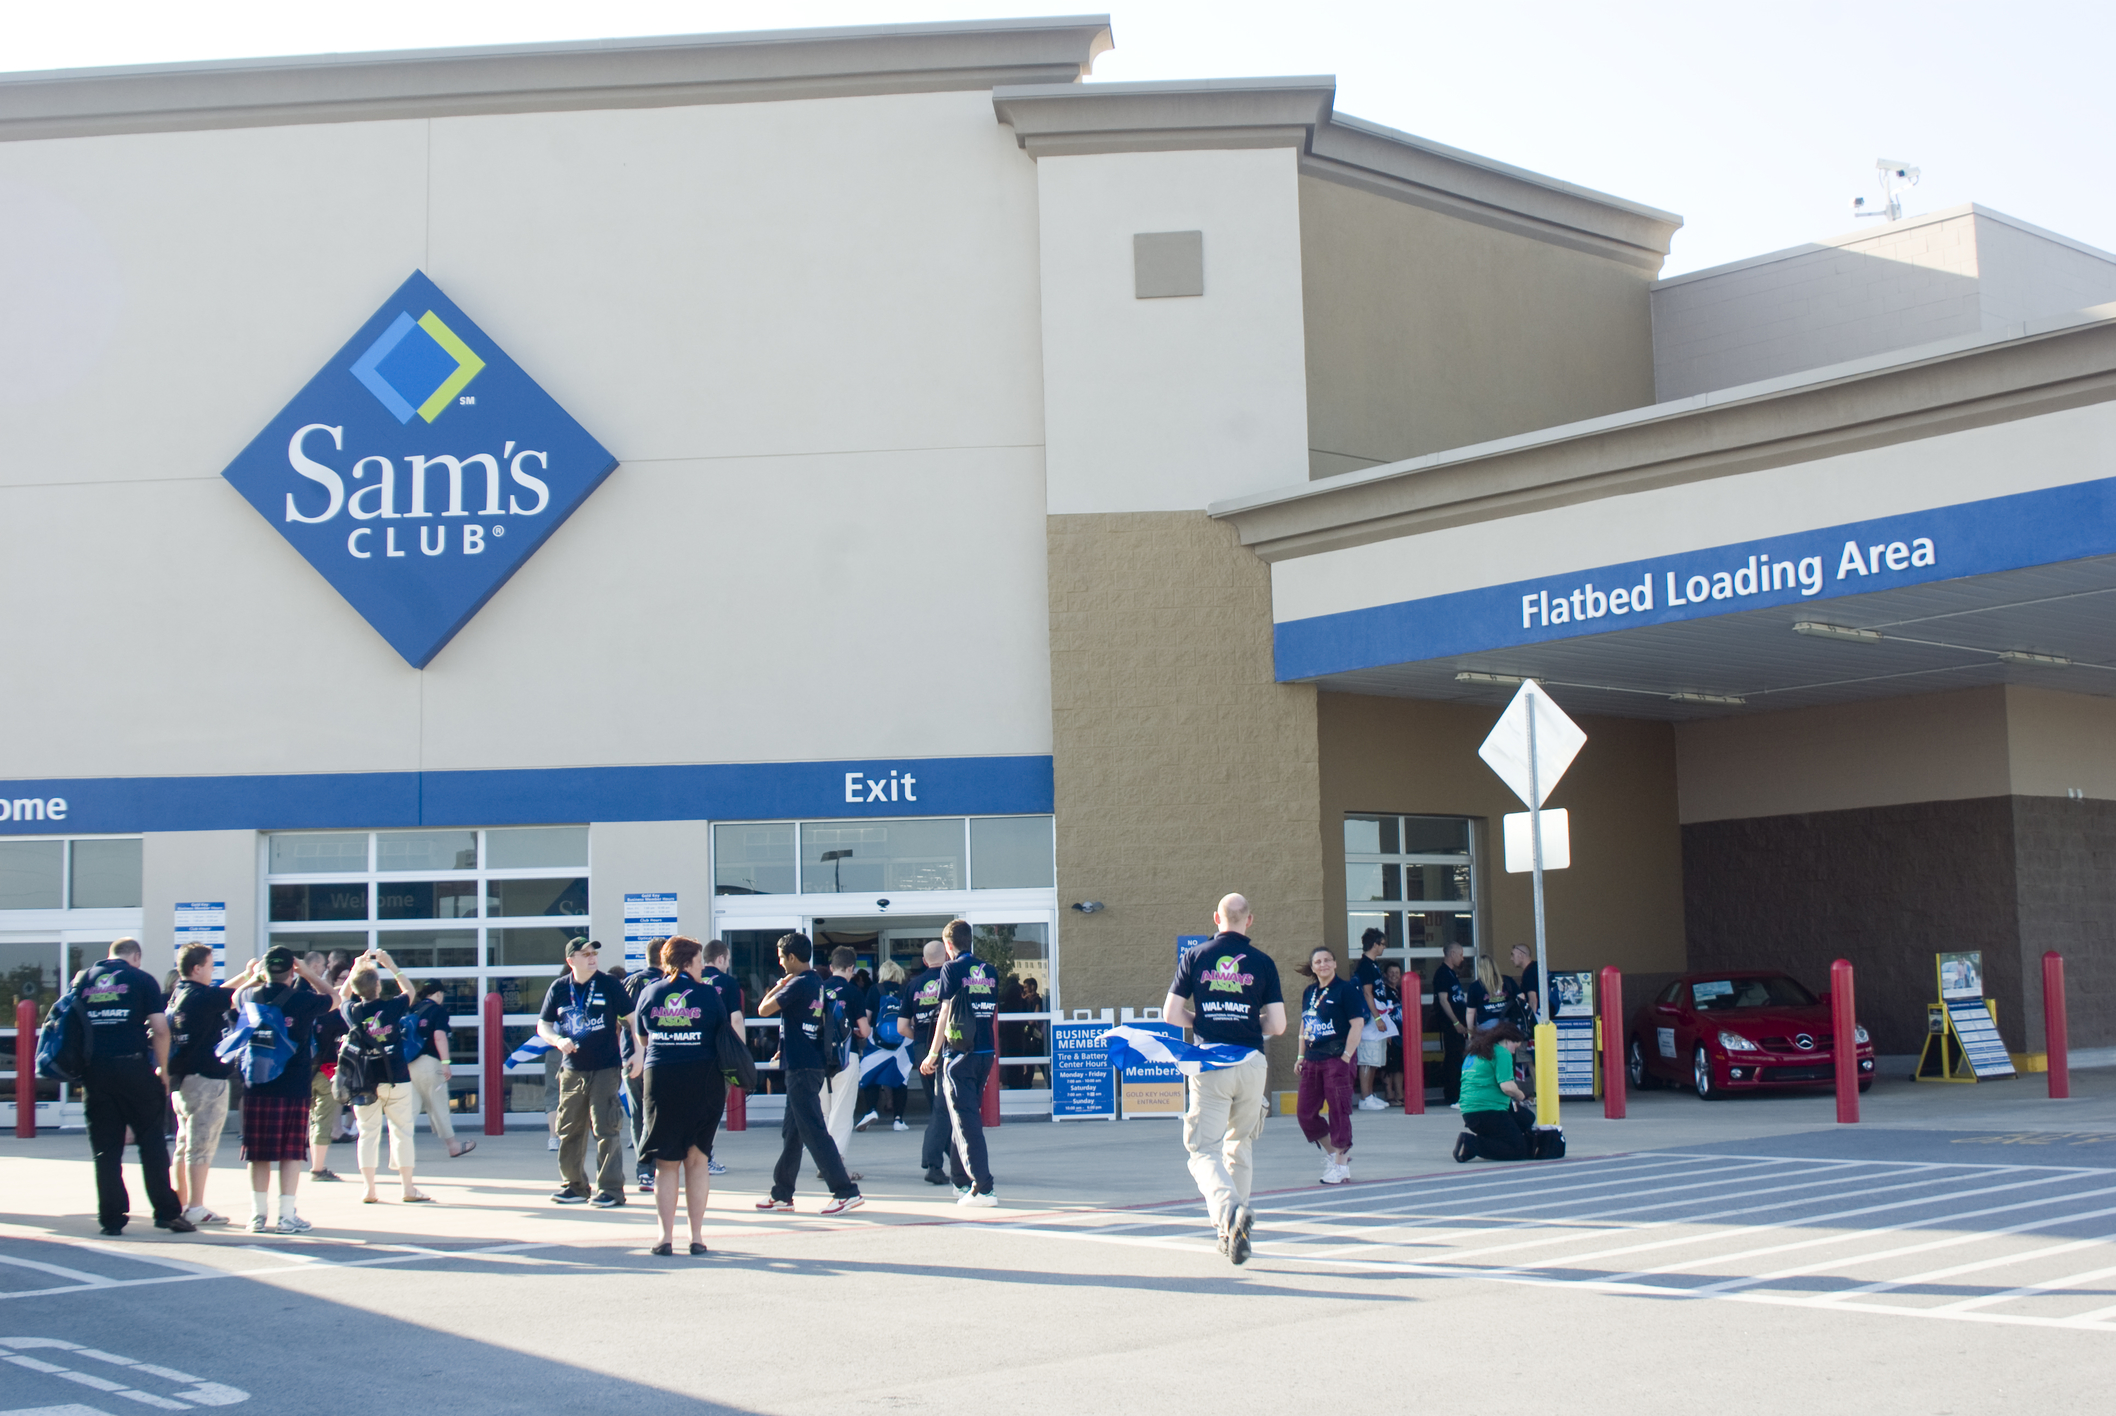 Sam’s Club: Free 3-month membership extension for members of closing clubs